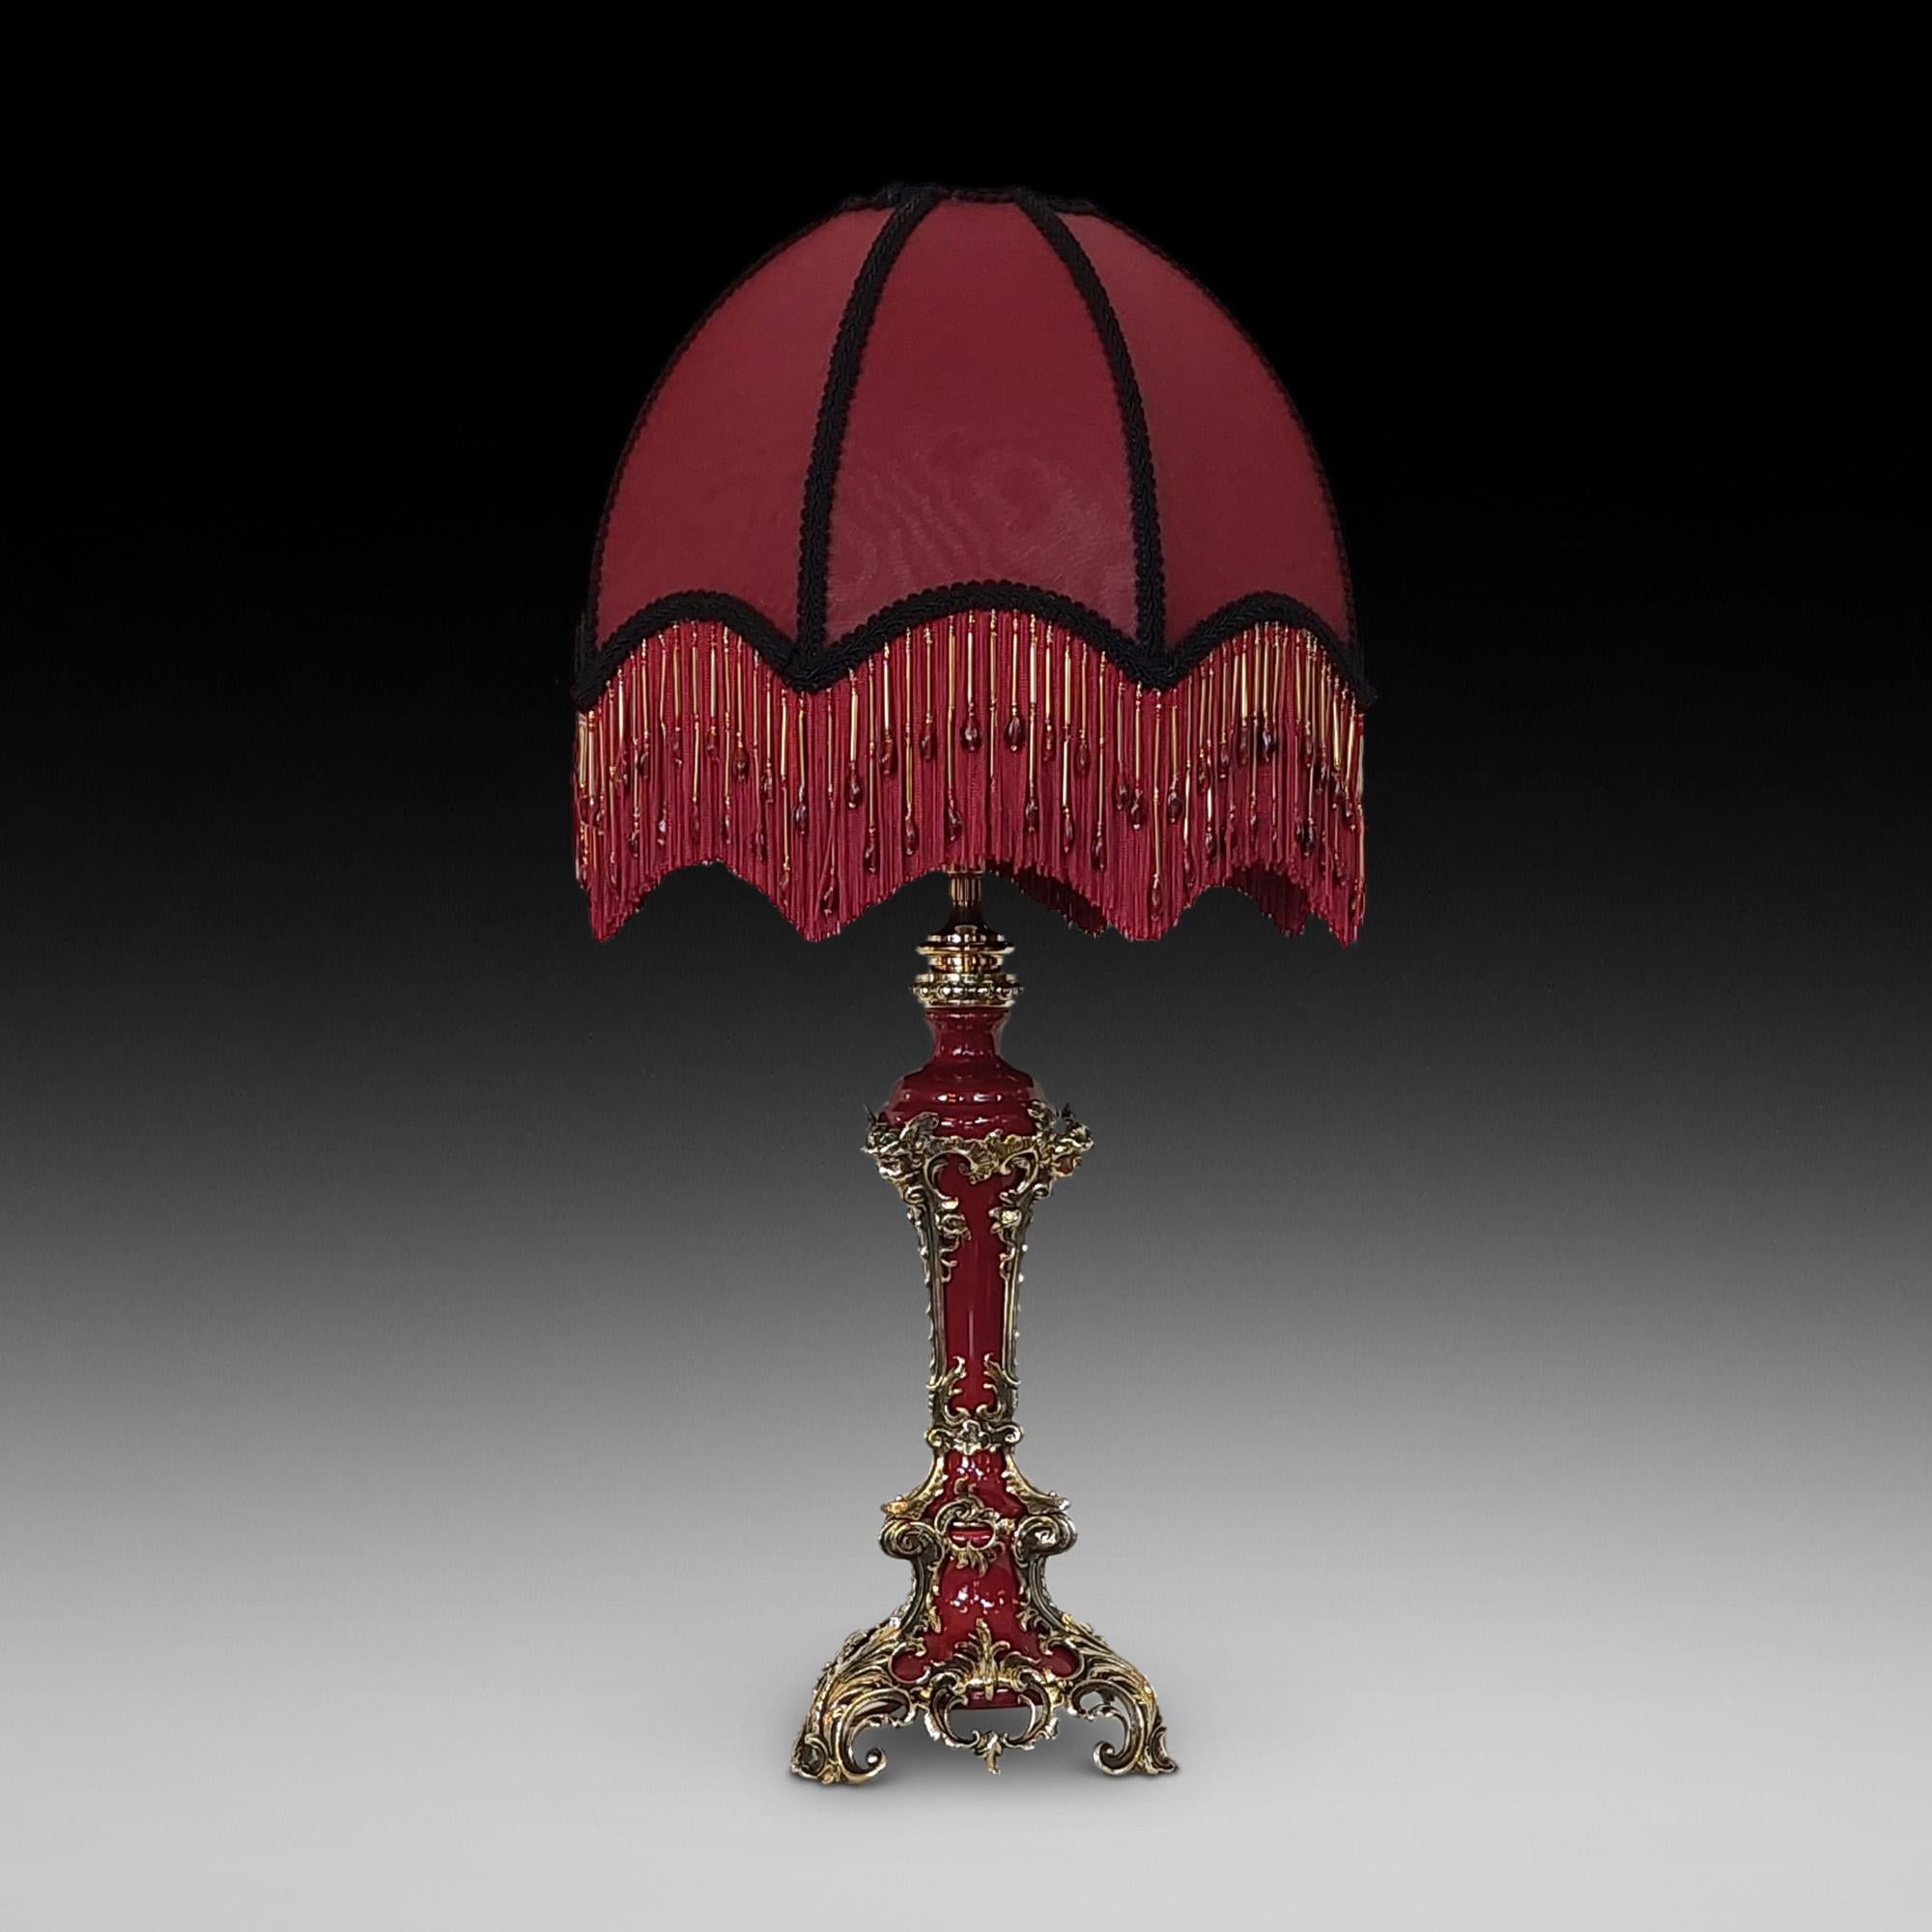 Late 19th century gilt metal mounted table lamp, the burgundy porcelain body of tapering form with applied gilt metal acanthus feet leading to cherub masks - 14